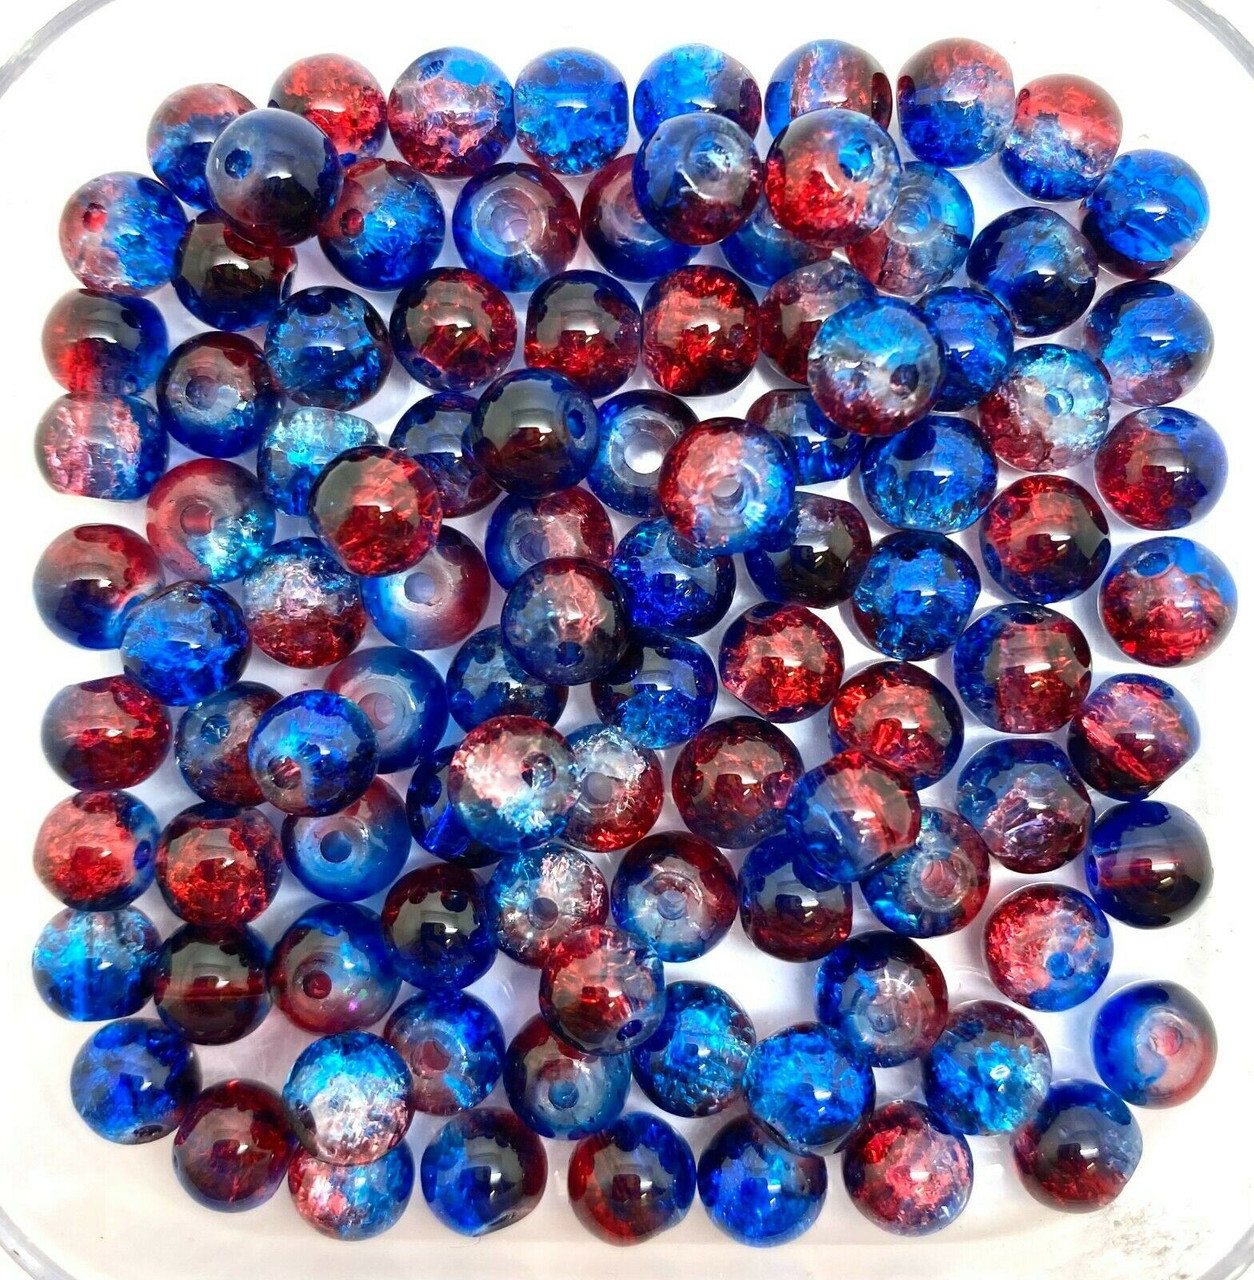 6mm Crackle Glass Beads - Red & Blue, 100 beads